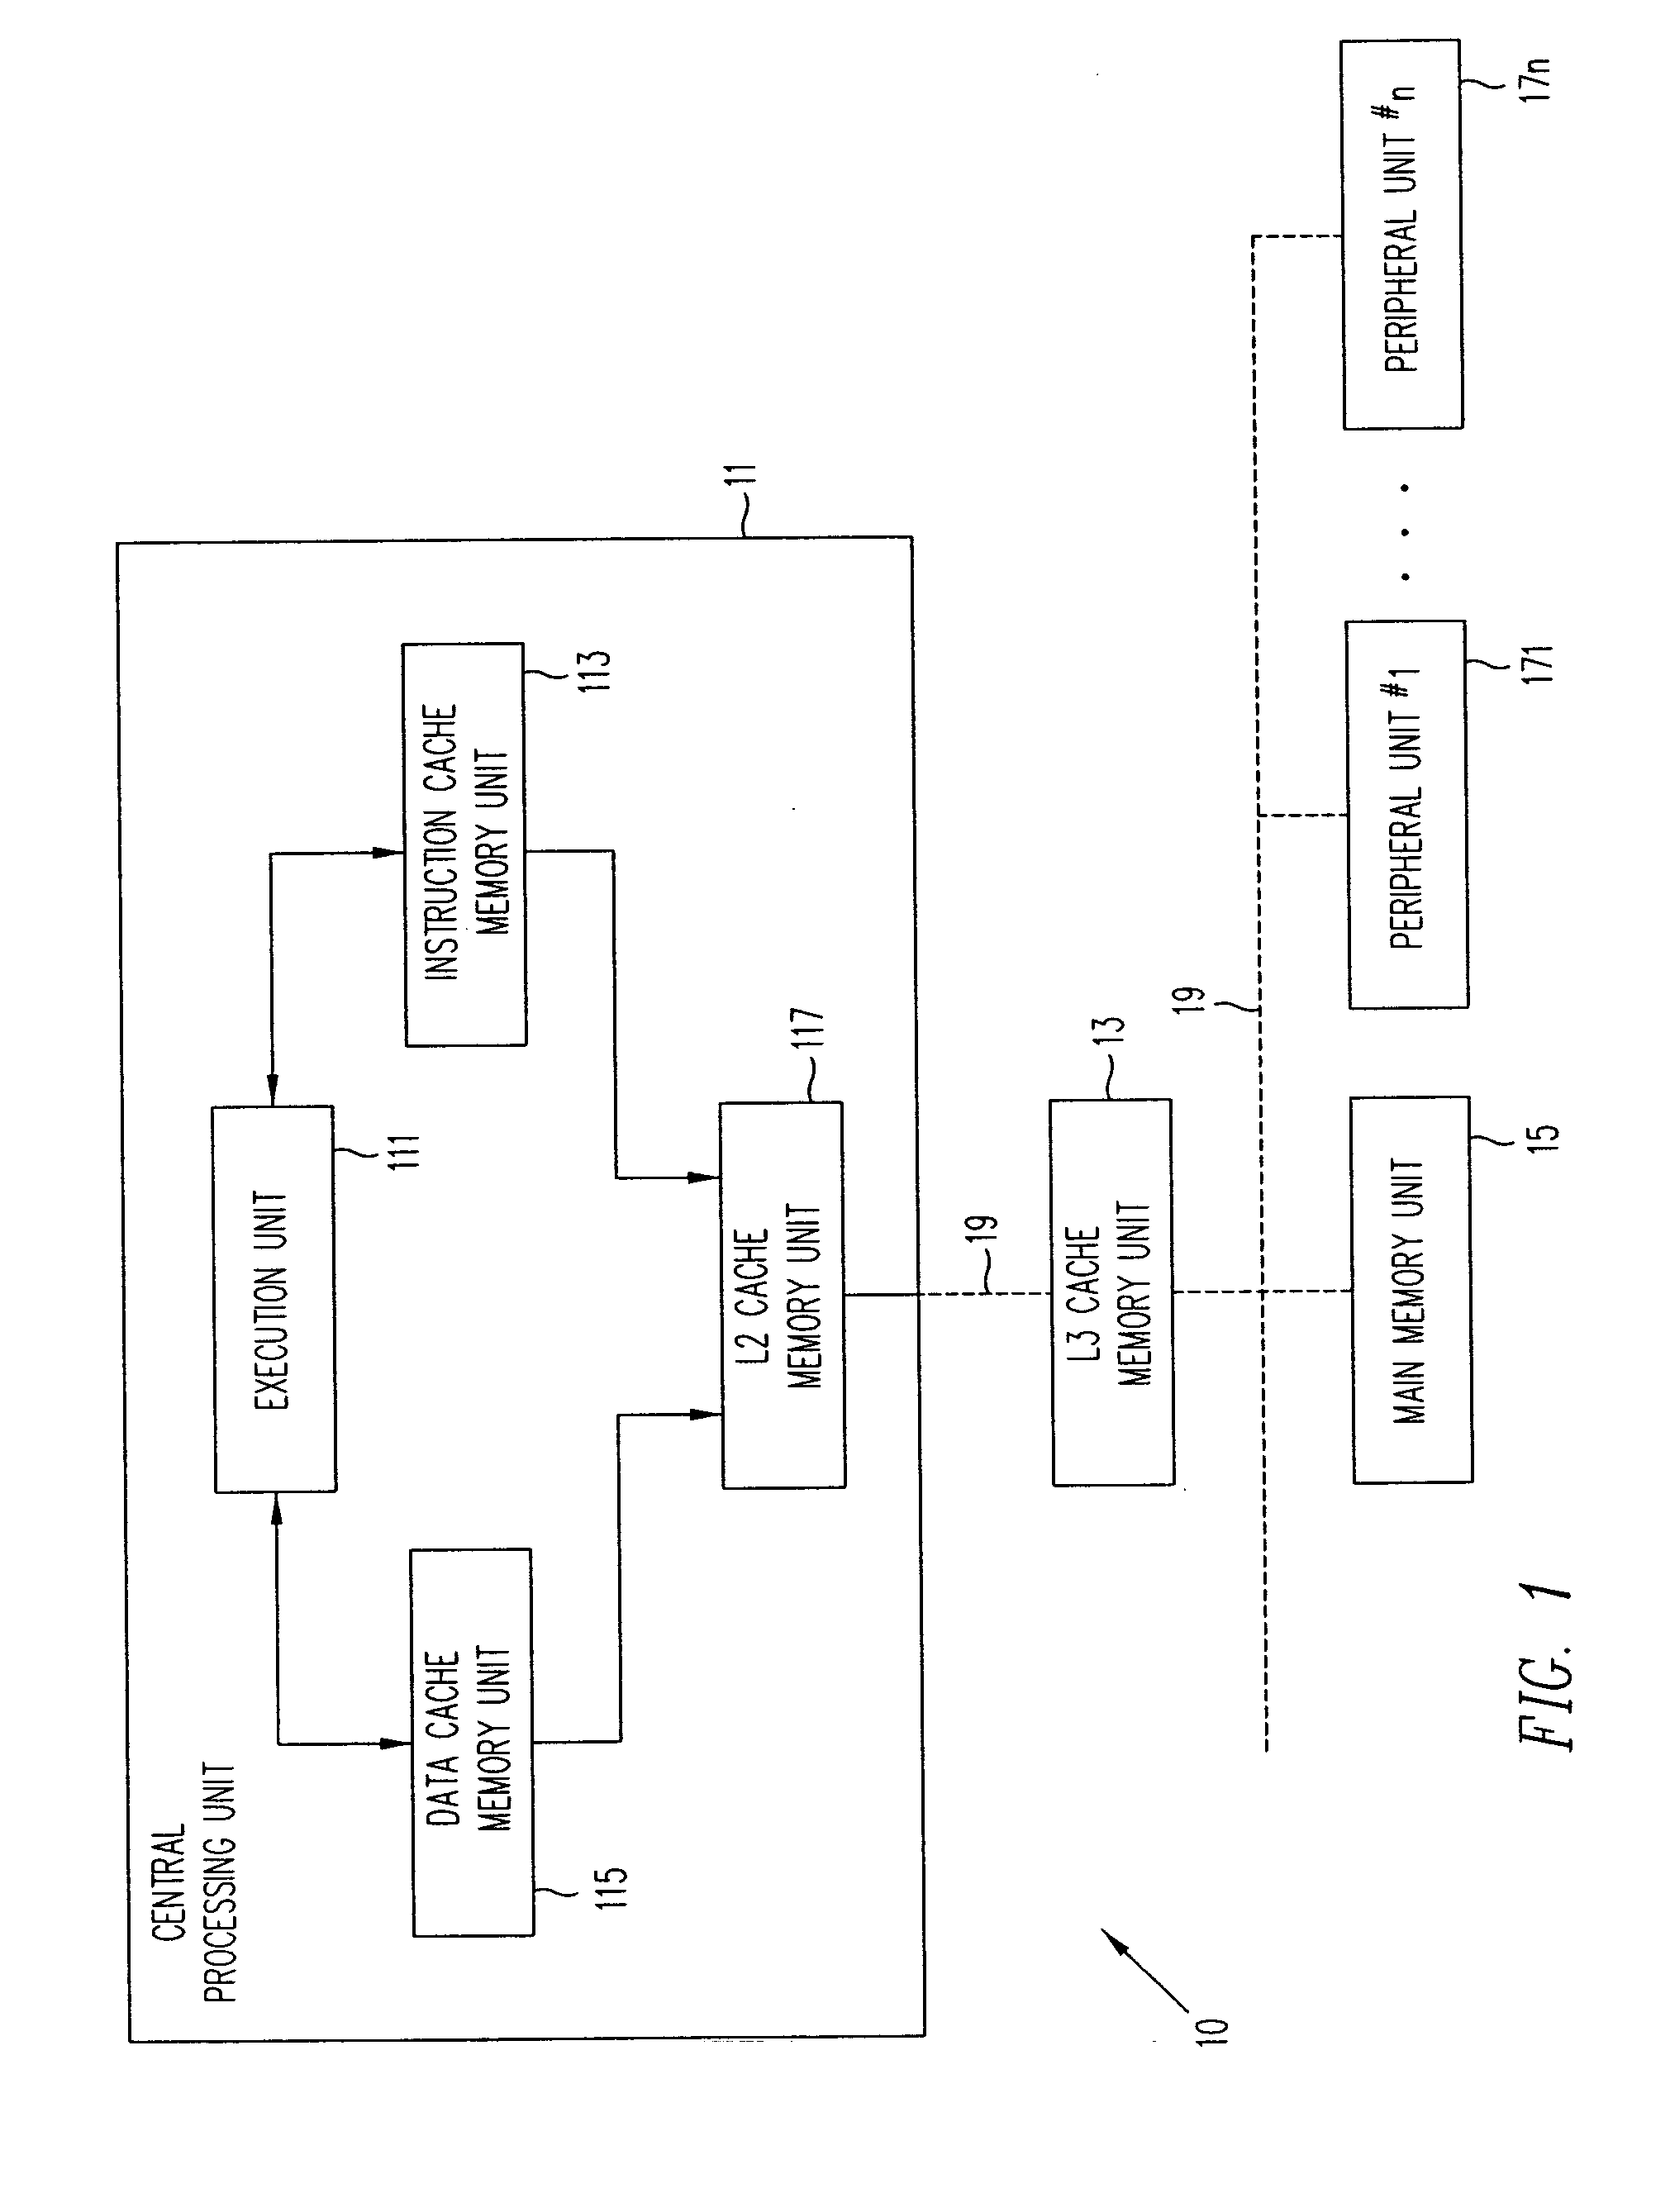 Apparatus and method for snoop access in a dual access, banked and pipelined data cache memory unit